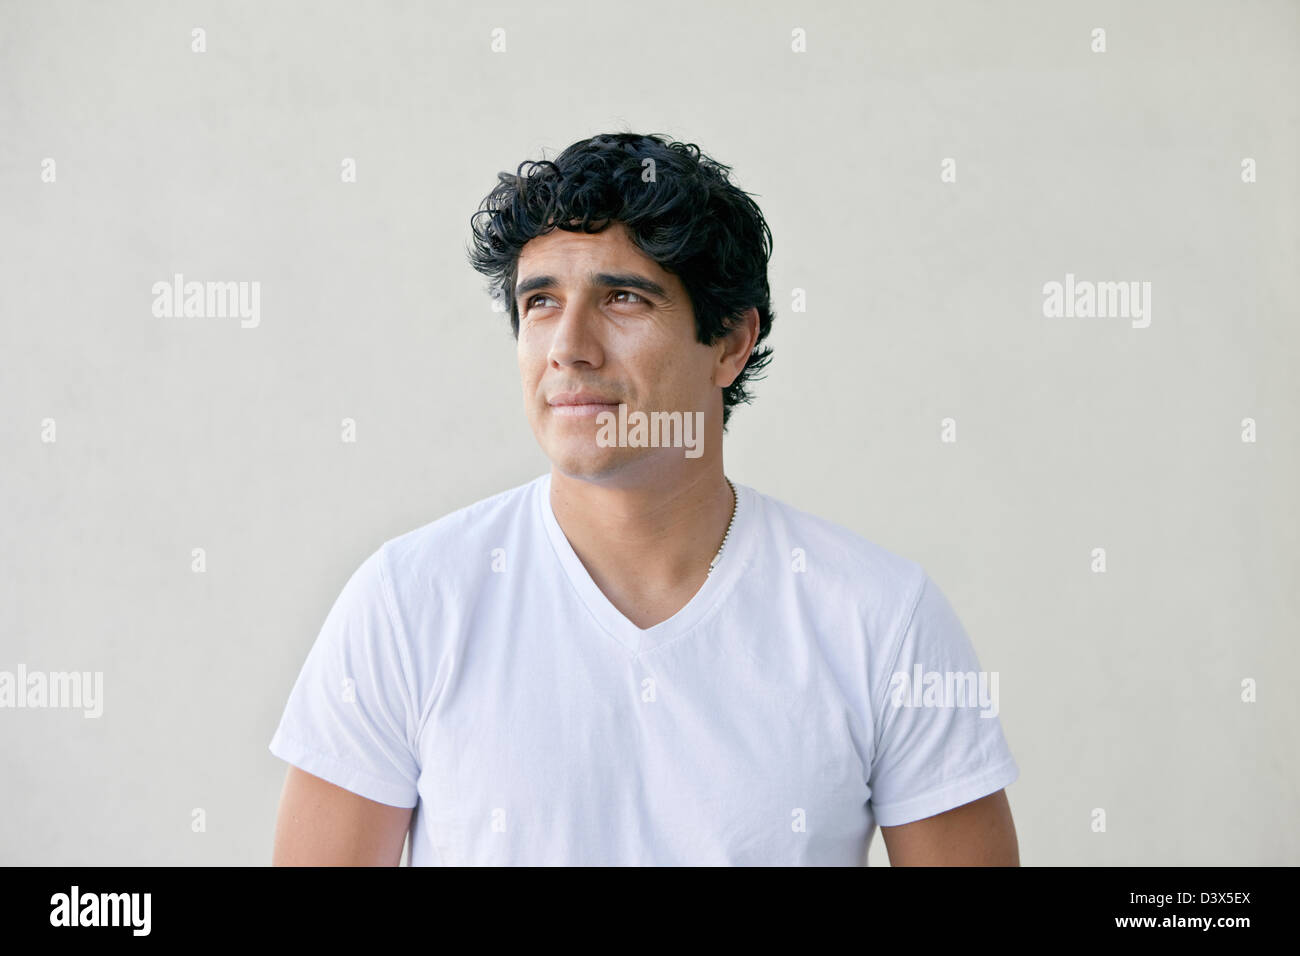 Thinking Portrait of Young Adult Mexican-American Man Stock Photo